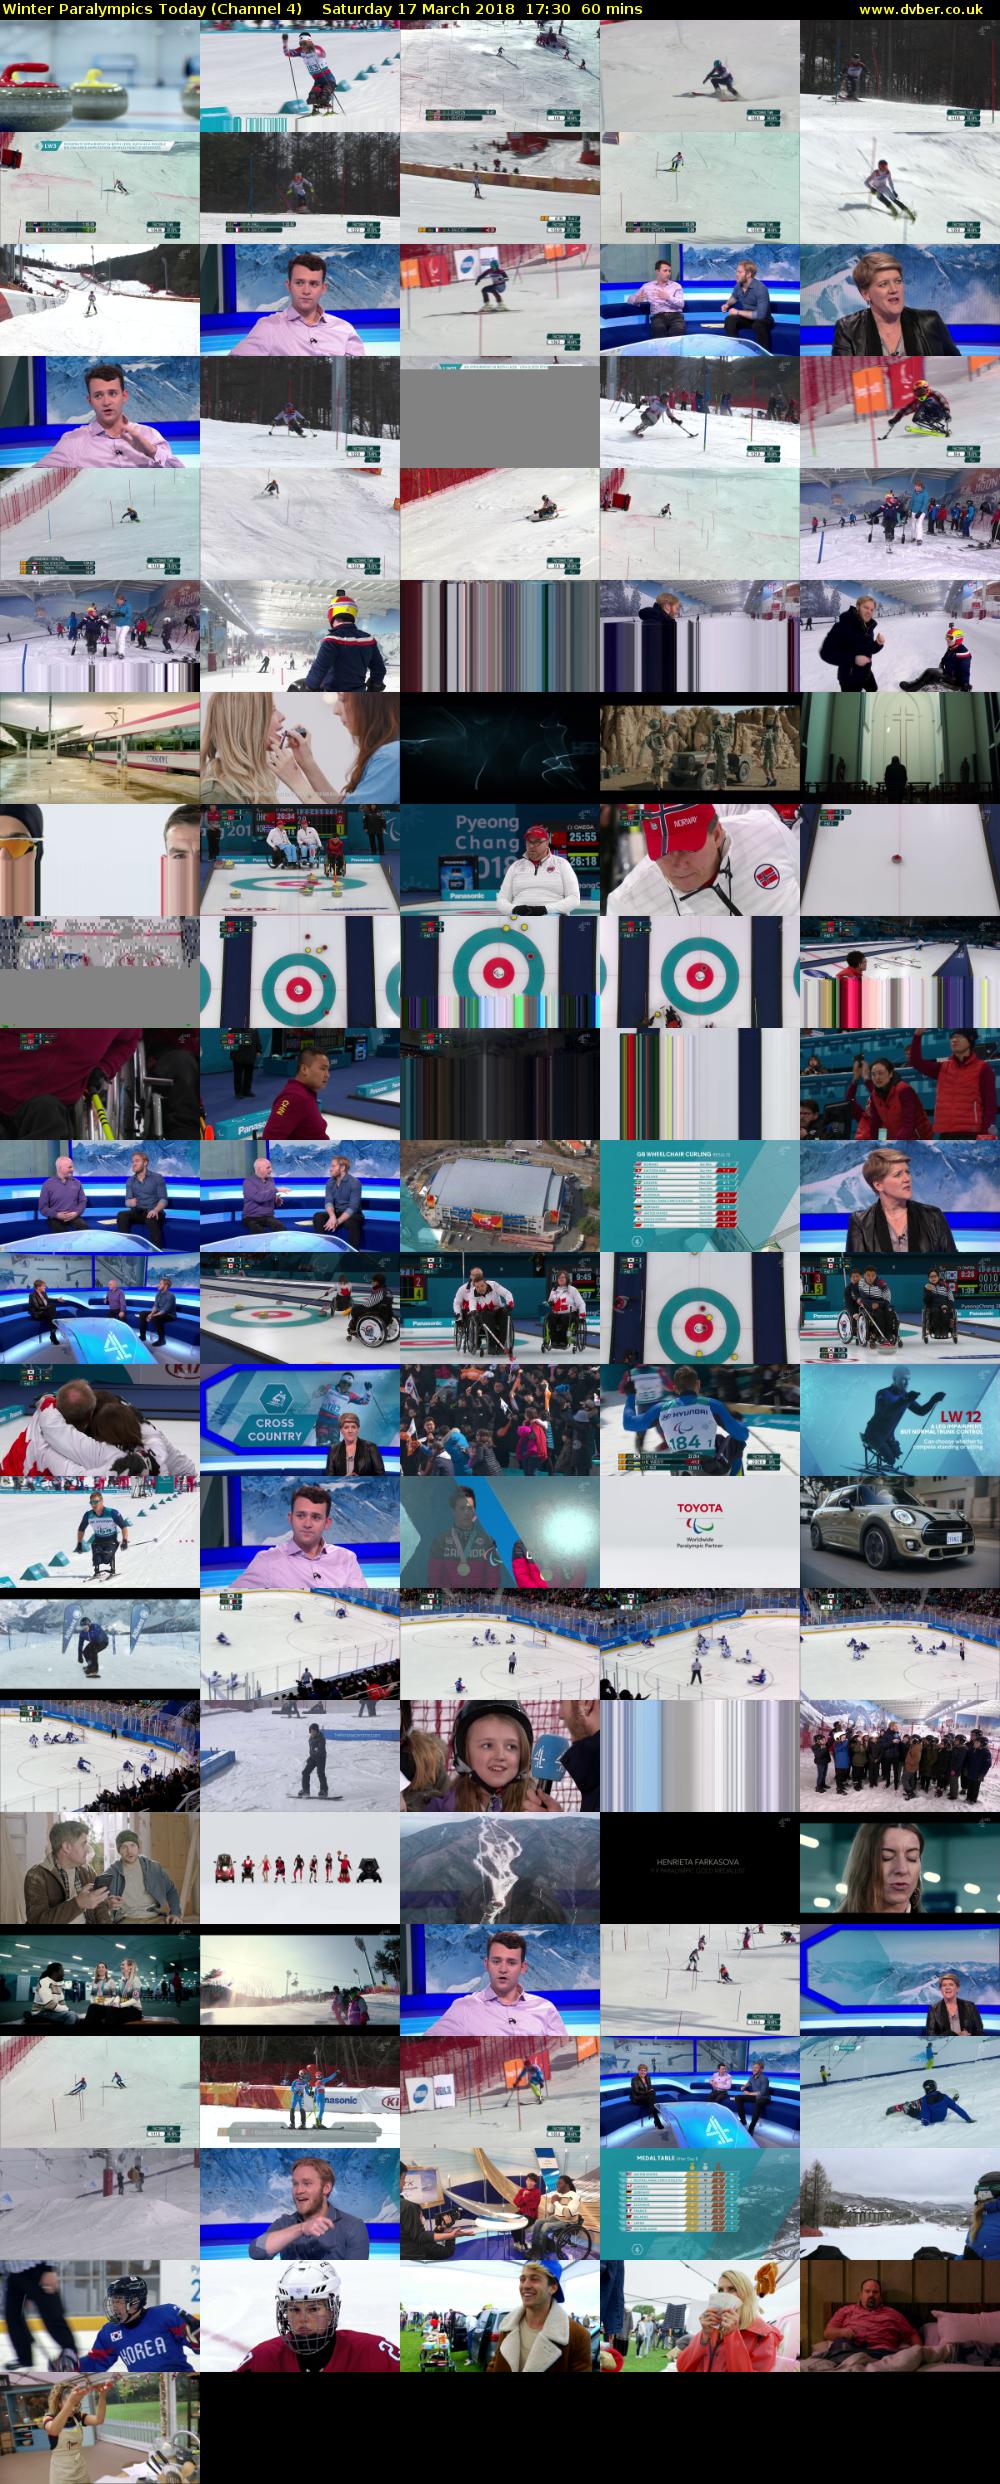 Winter Paralympics Today (Channel 4) Saturday 17 March 2018 17:30 - 18:30